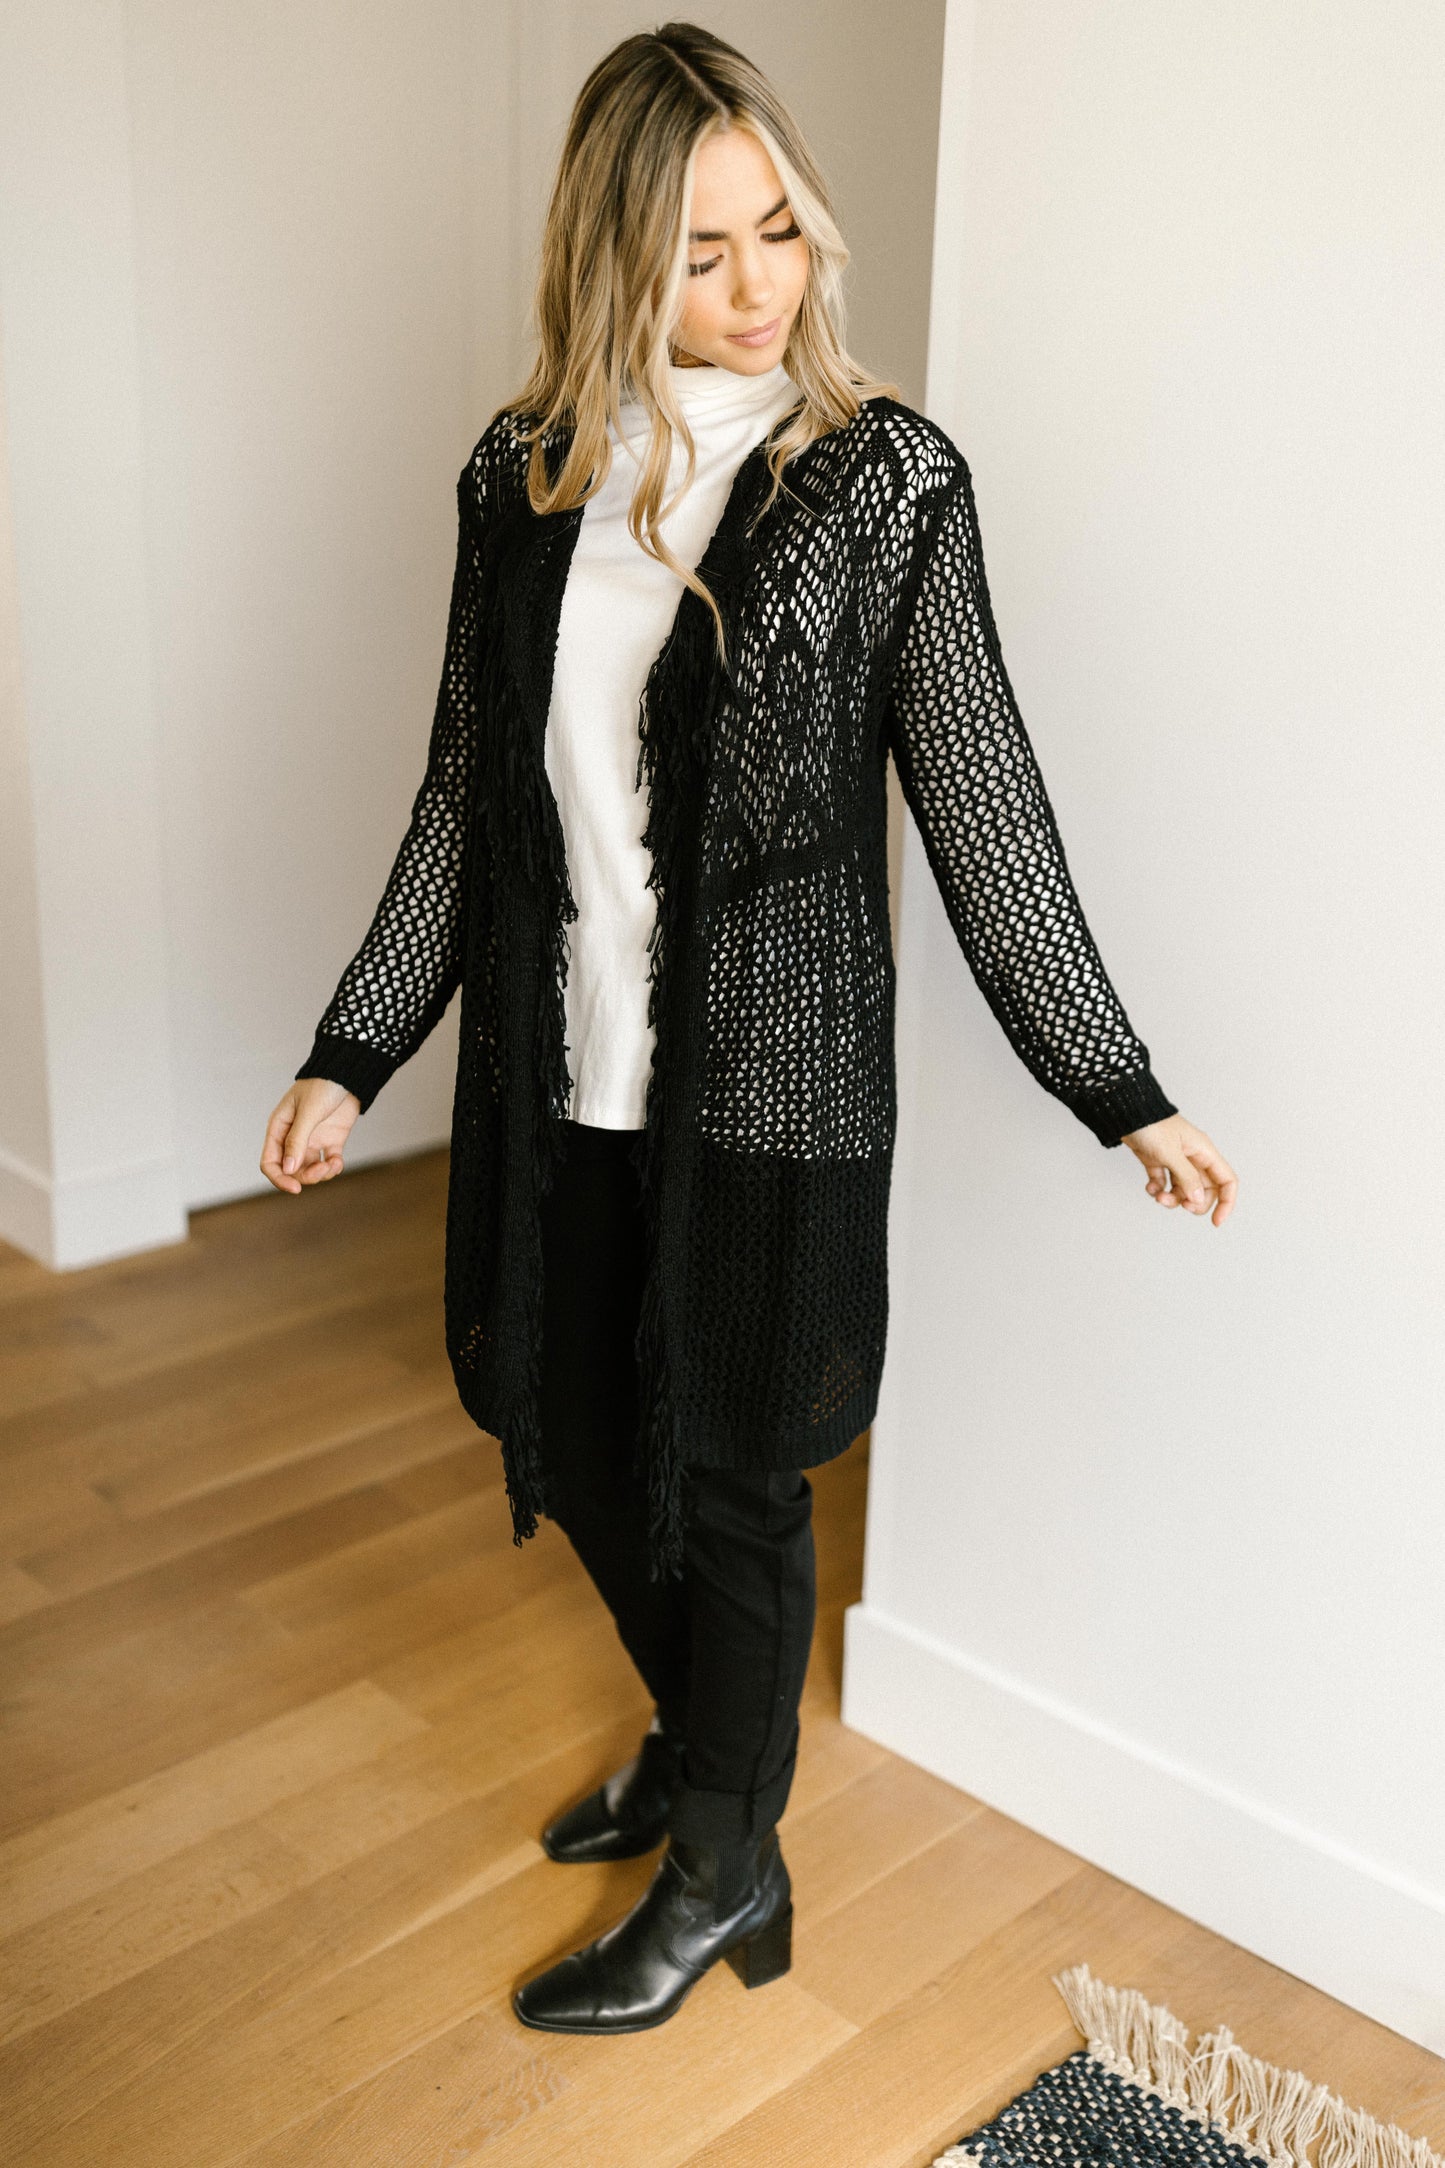 Knit And Fringe Cardigan in Black - The Fiery Jasmine